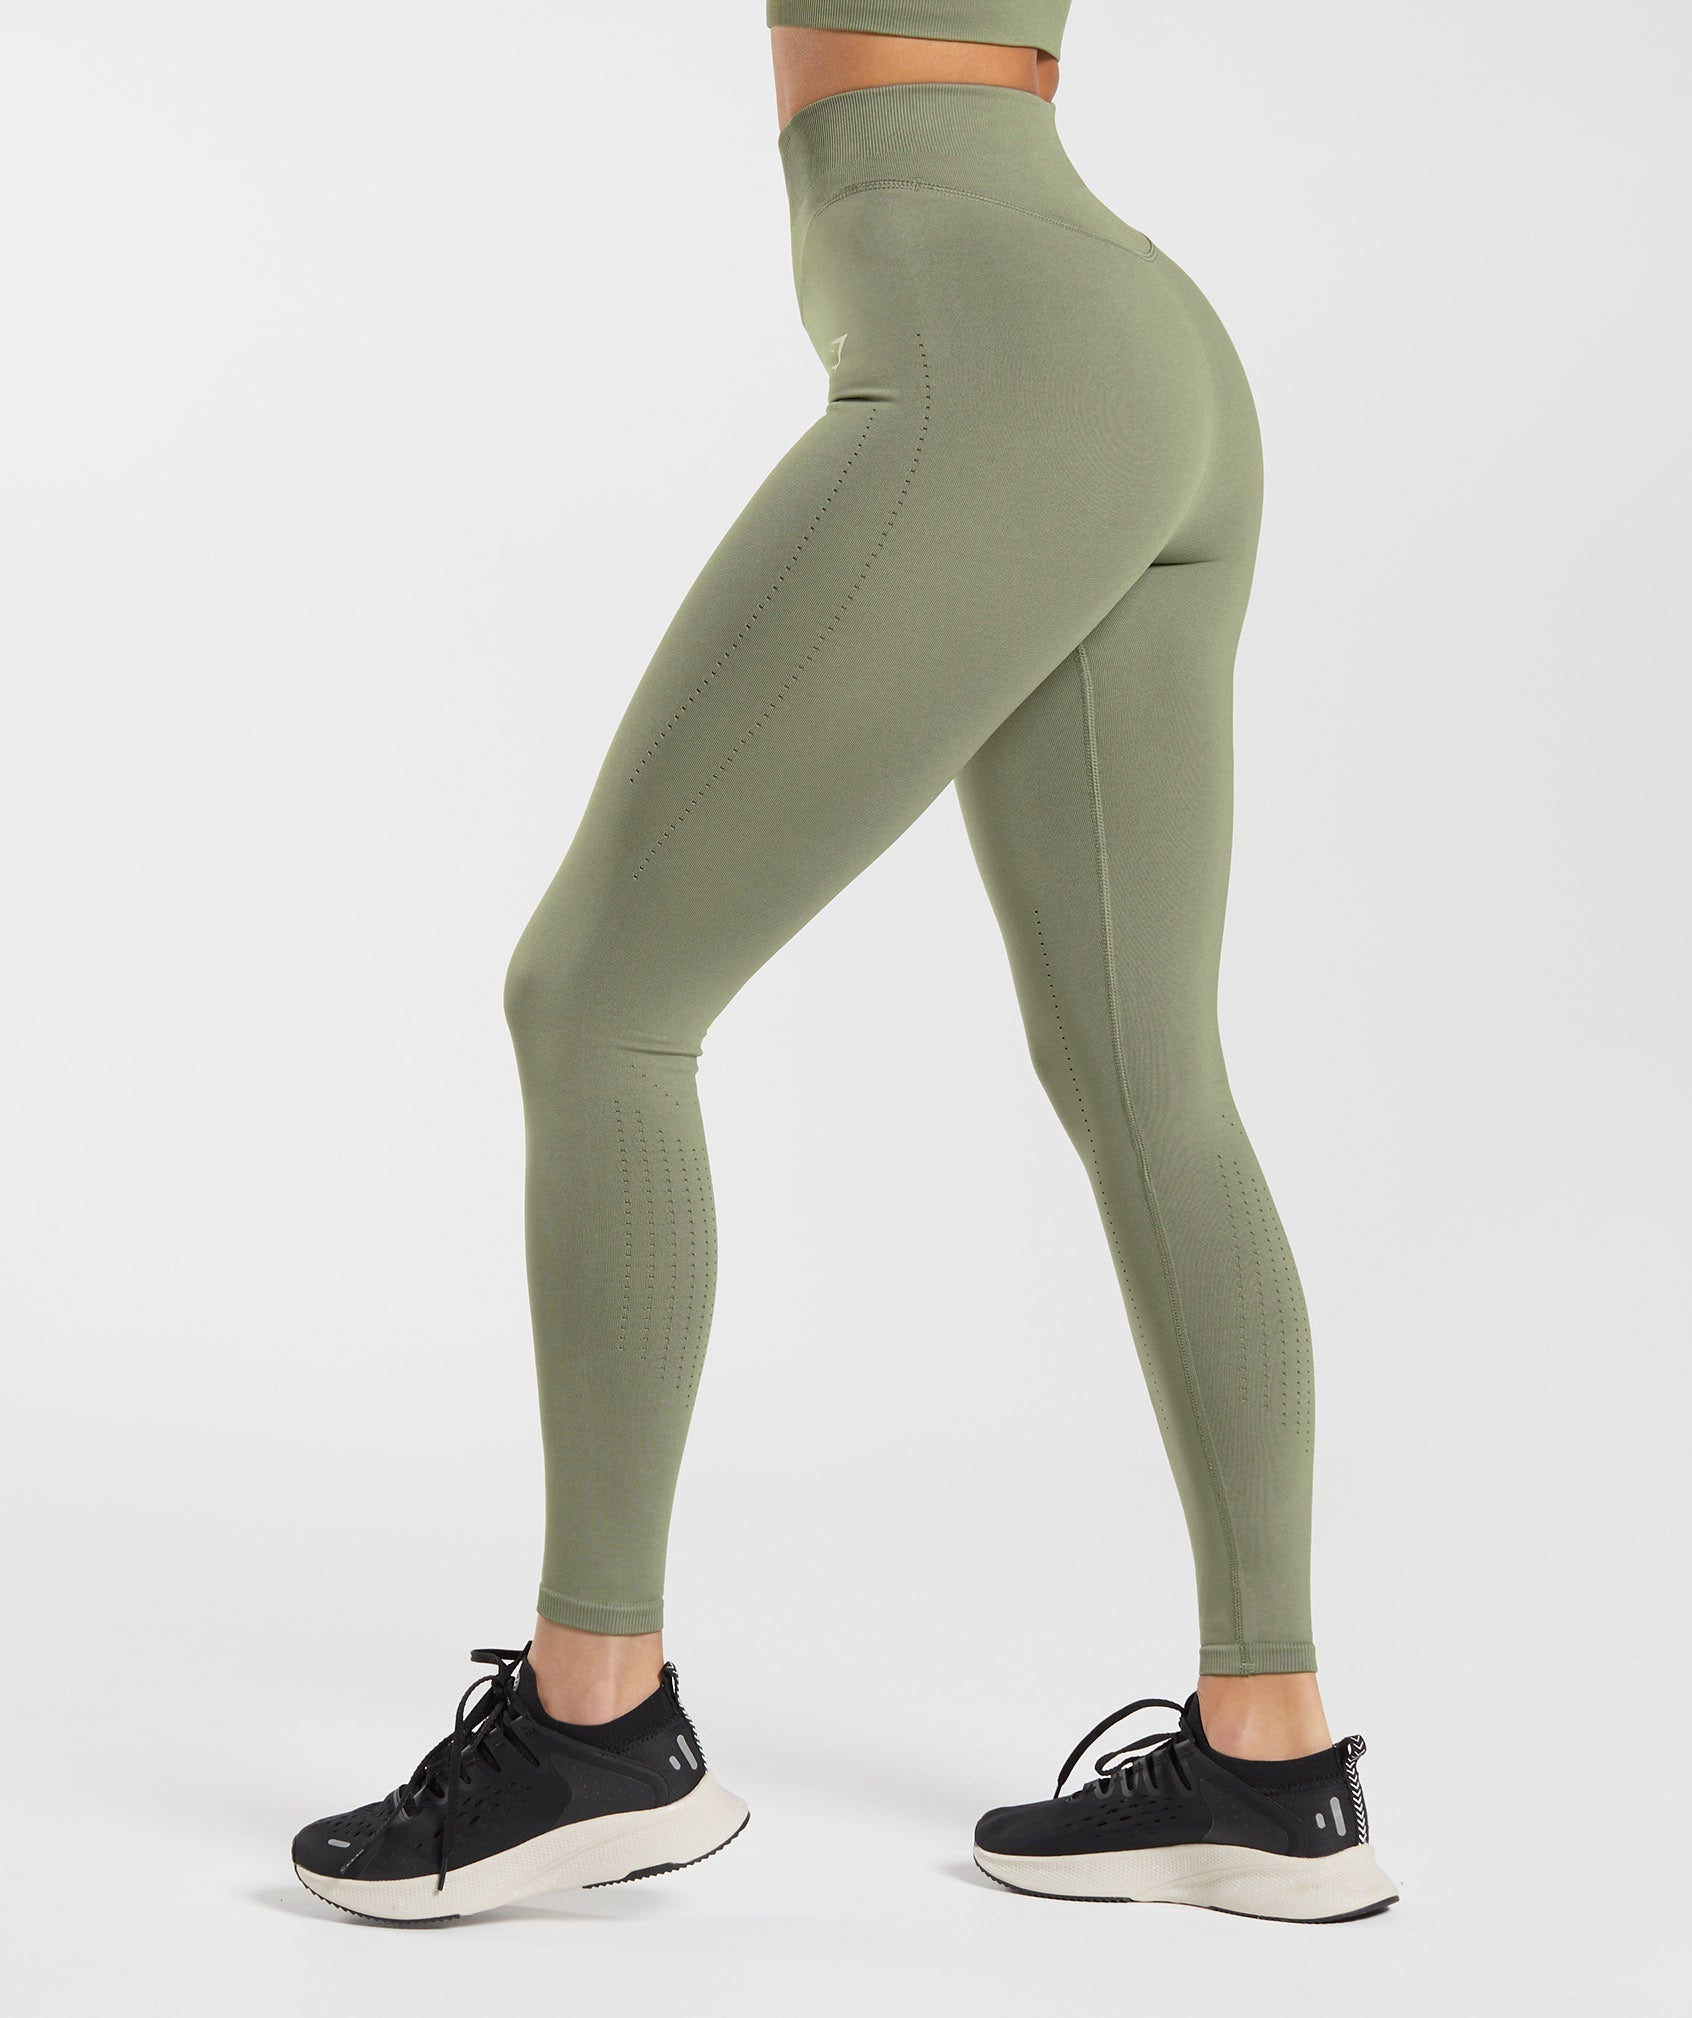 Yoga Outfits Sexy Hollow Out Sport Leggings Women Gym Legging Summer Thin  Pants Seamless Running Breathable Fitness Sportswear From Capsicum, $31.46